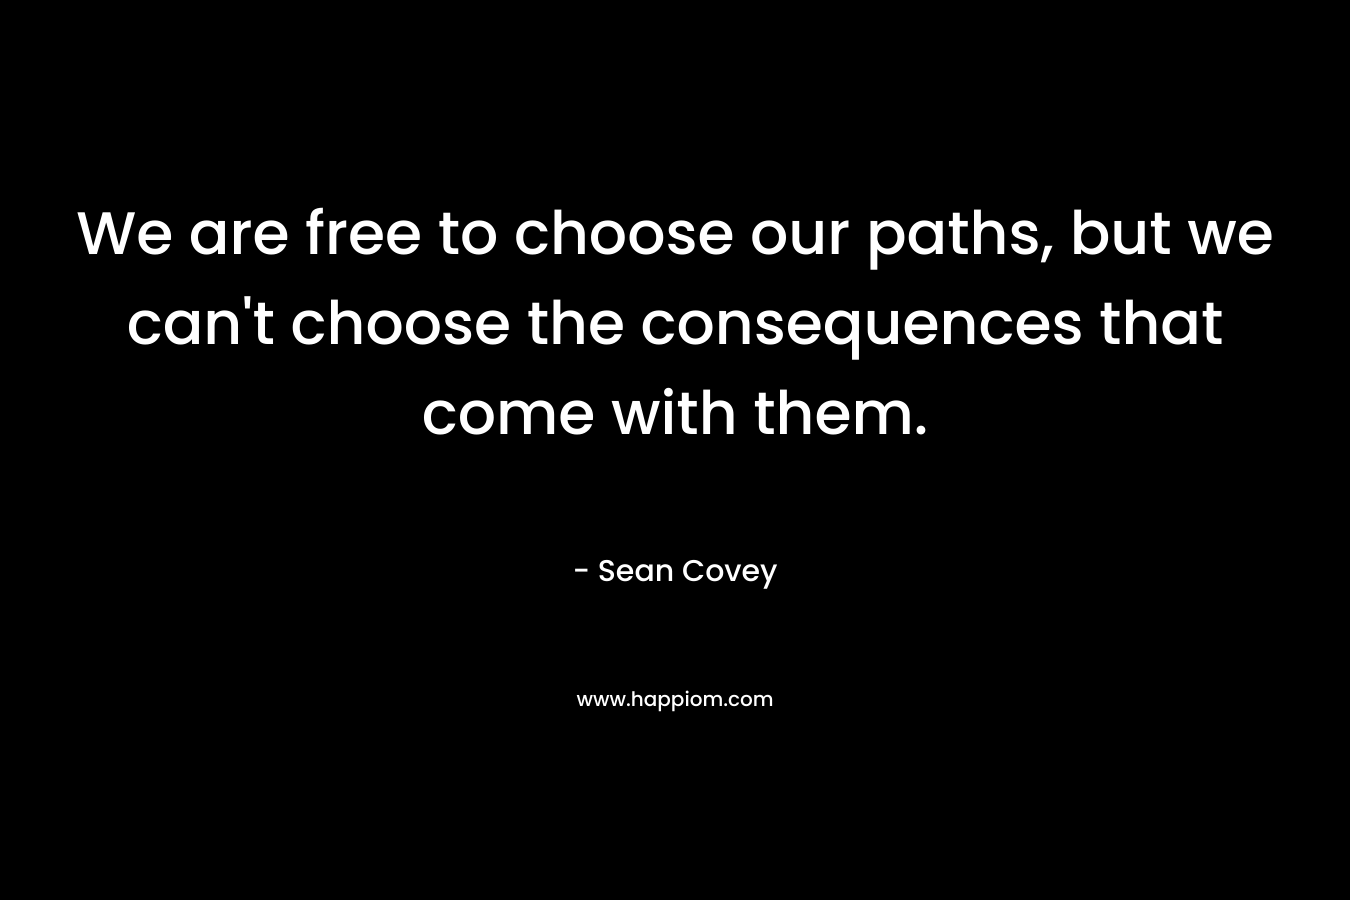 We are free to choose our paths, but we can’t choose the consequences that come with them. – Sean Covey